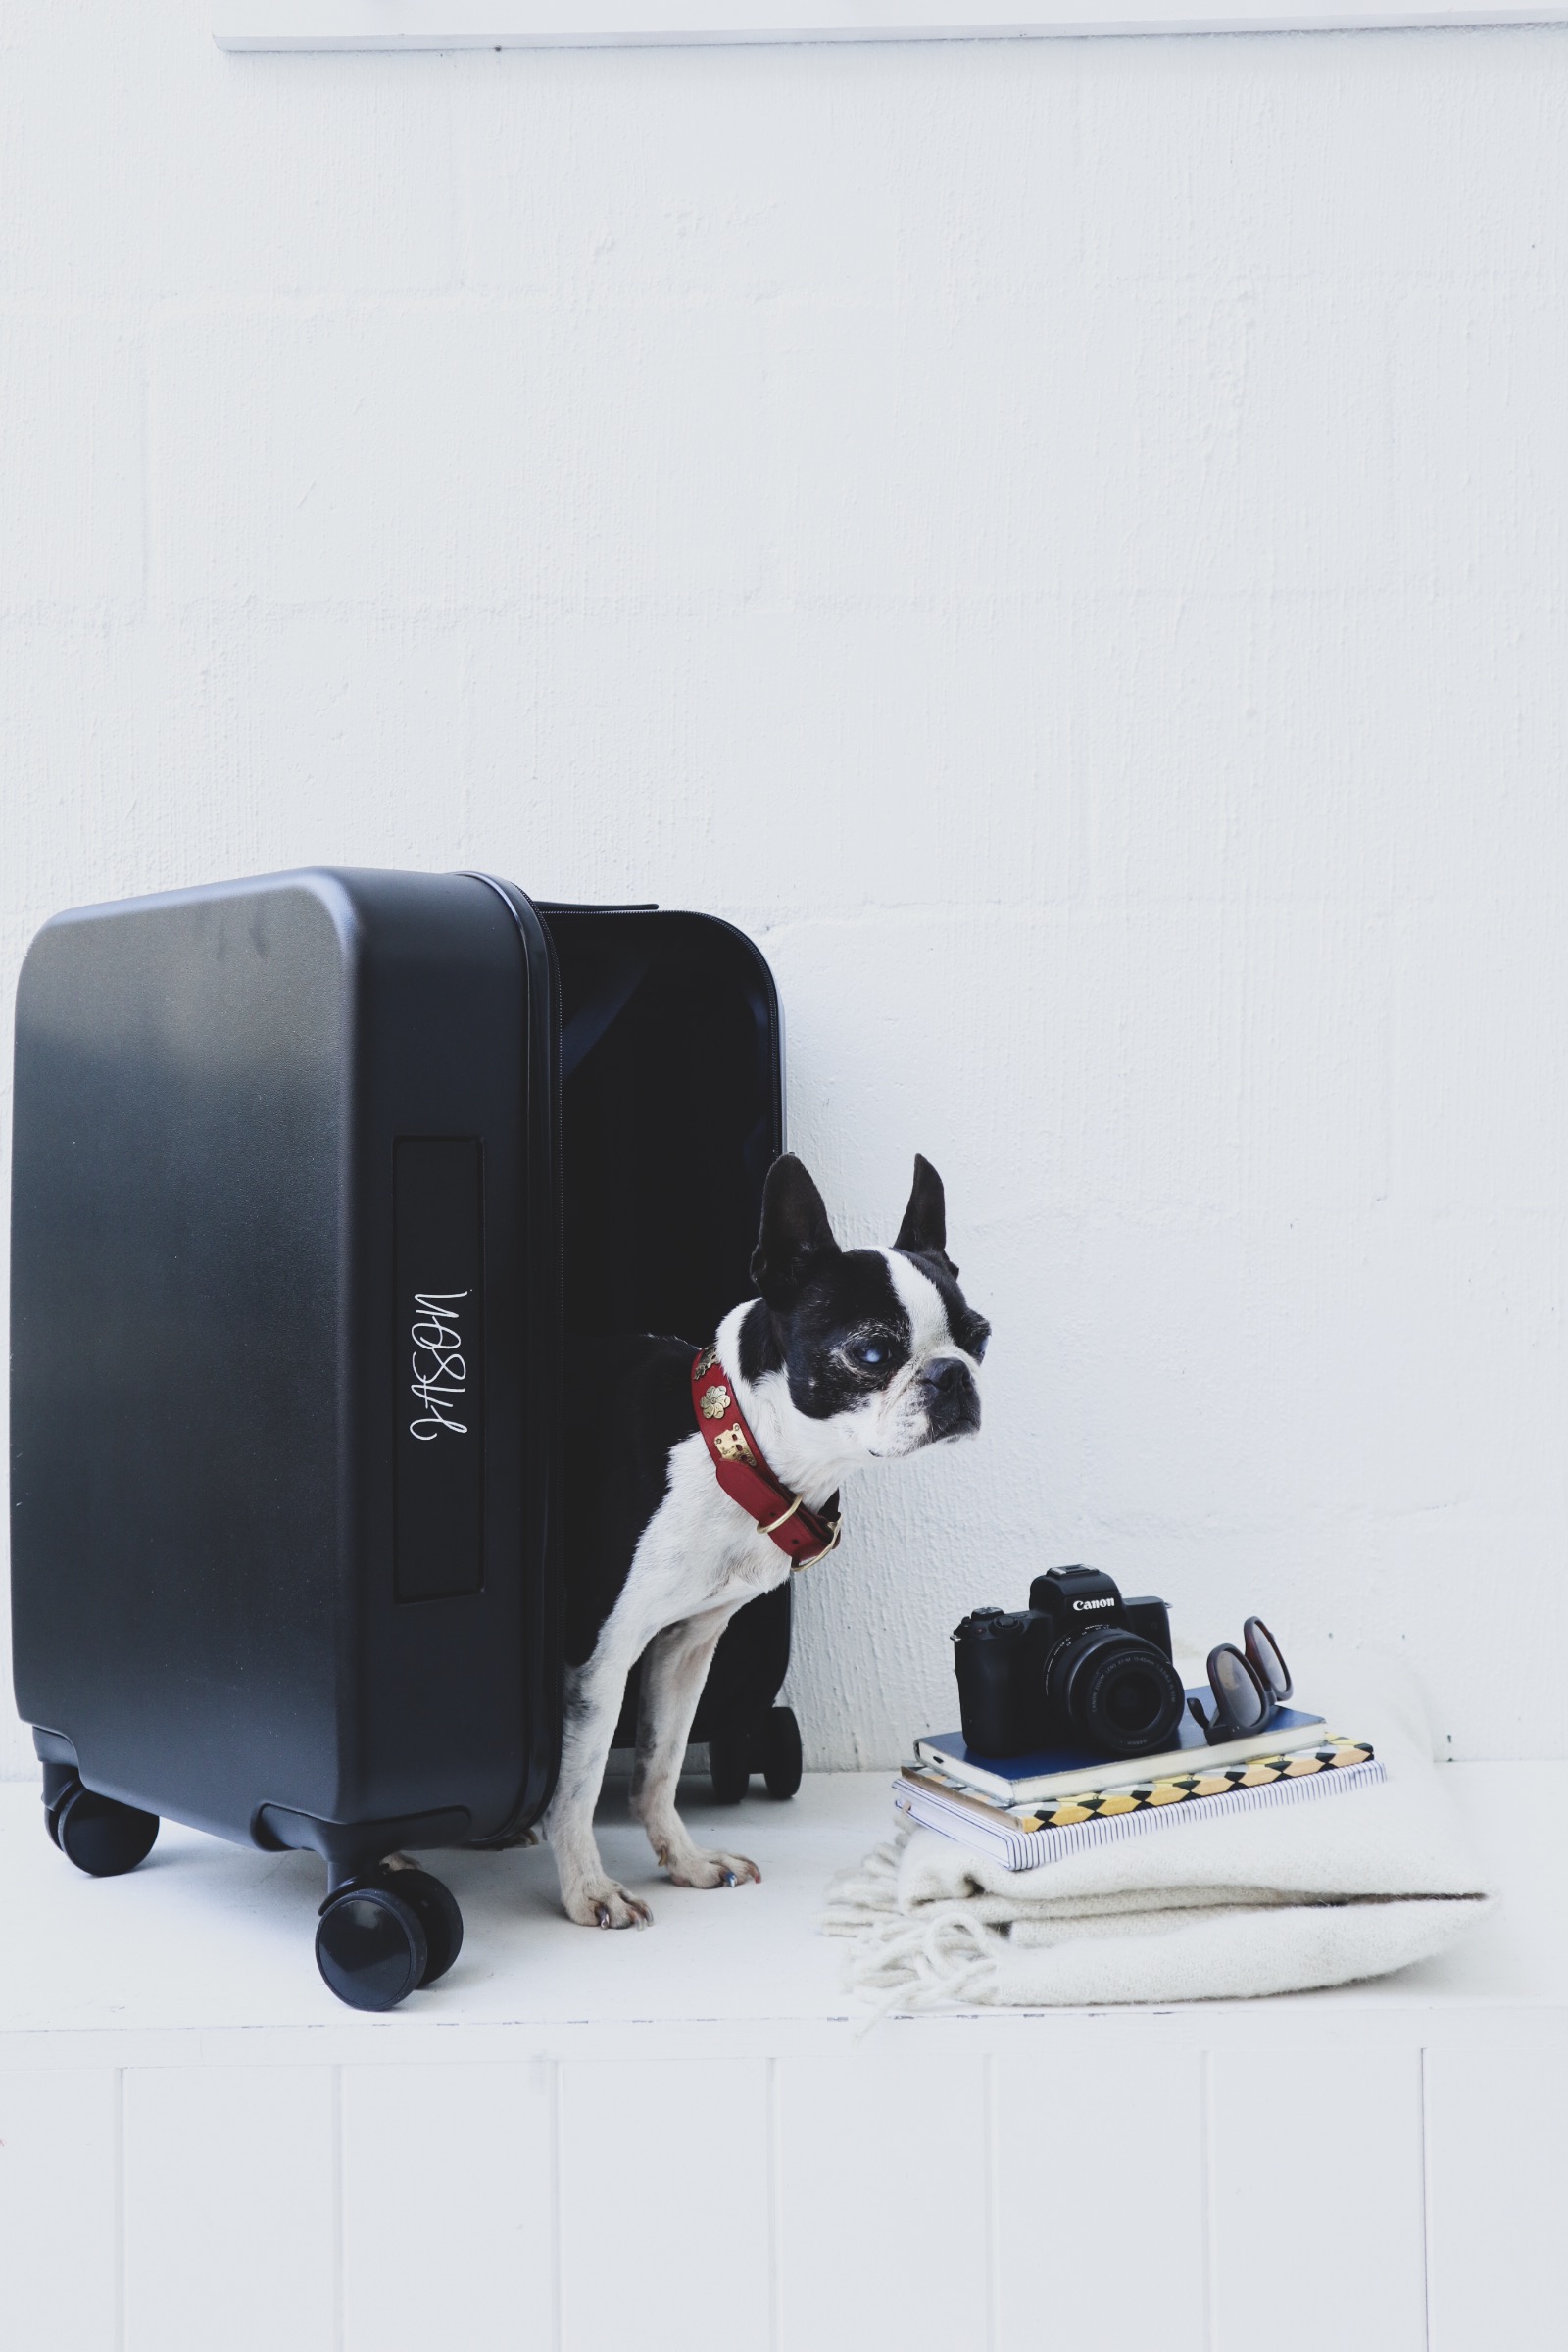 luggage – put your name on it